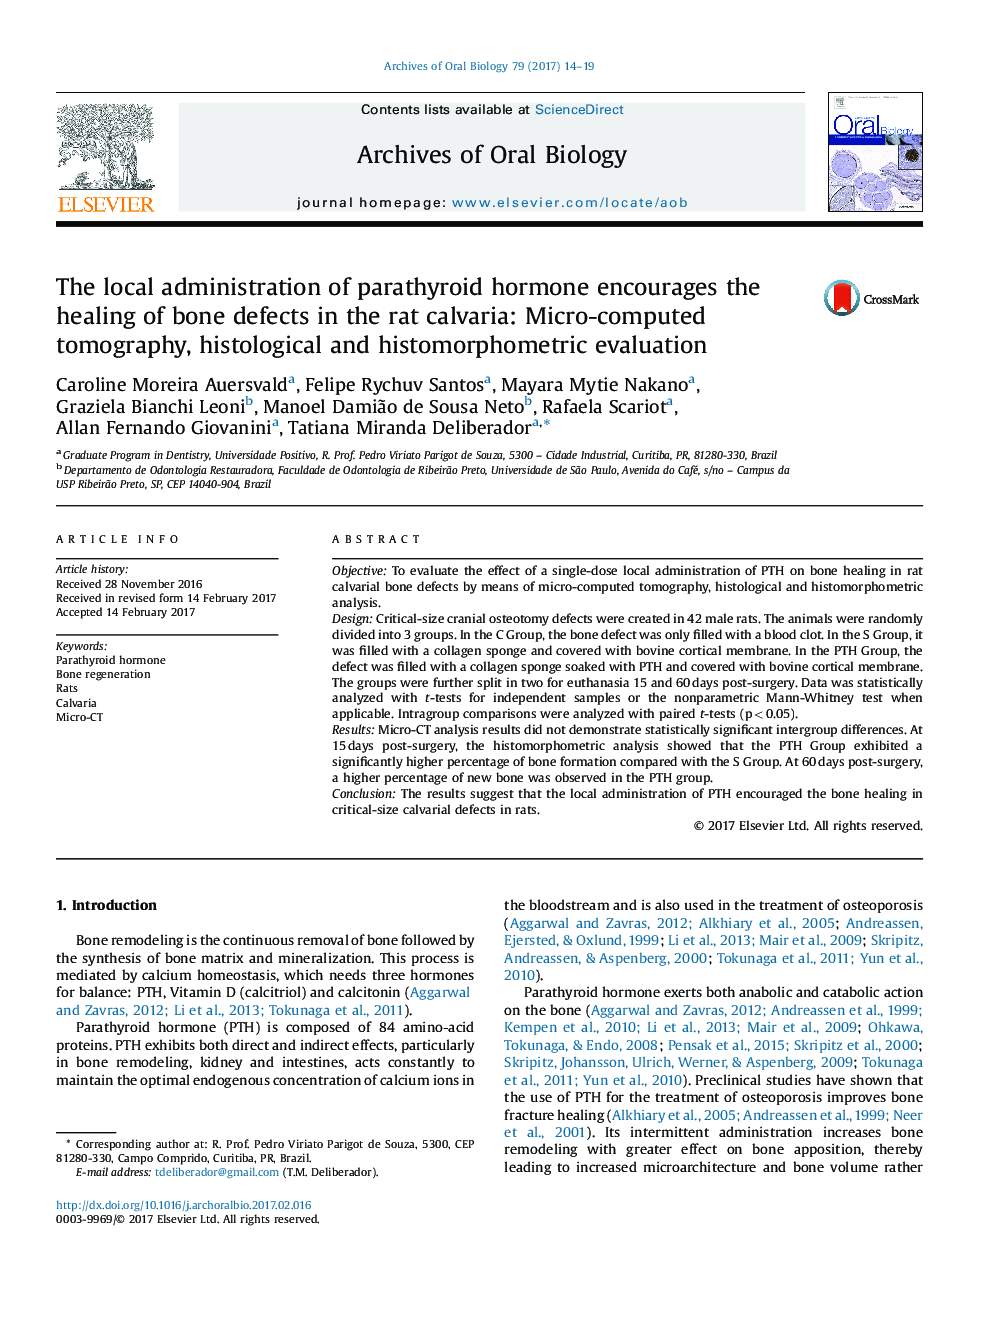 The local administration of parathyroid hormone encourages the healing of bone defects in the rat calvaria: Micro-computed tomography, histological and histomorphometric evaluation